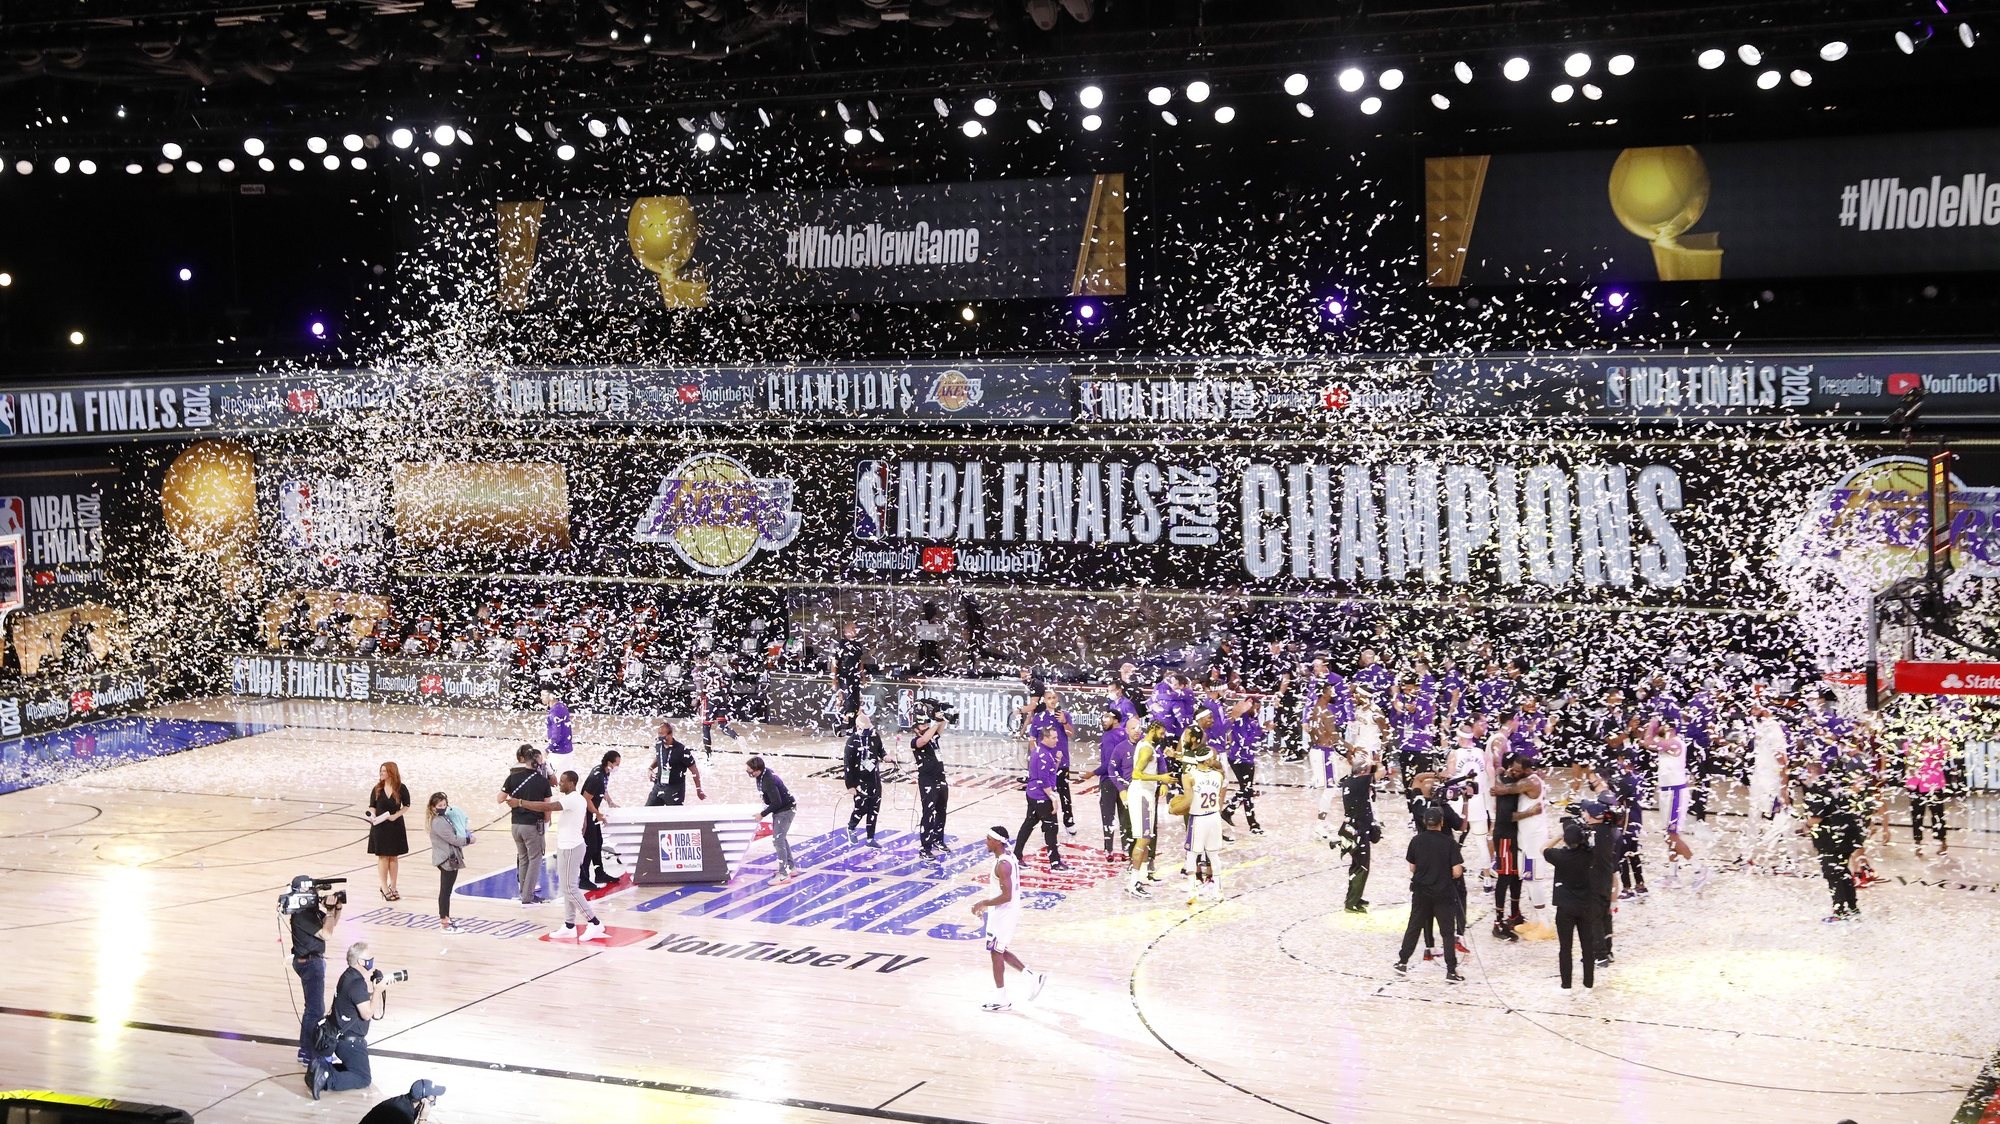 epa08736889 The Los Angeles Lakers celebrate after defeating the Miami Heat to win the 2020 NBA Finals at the ESPN Wide World of Sports Complex in Kissimmee, Florida, USA, 11 October 2020.  EPA/ERIK S. LESSER SHUTTERSTOCK OUT